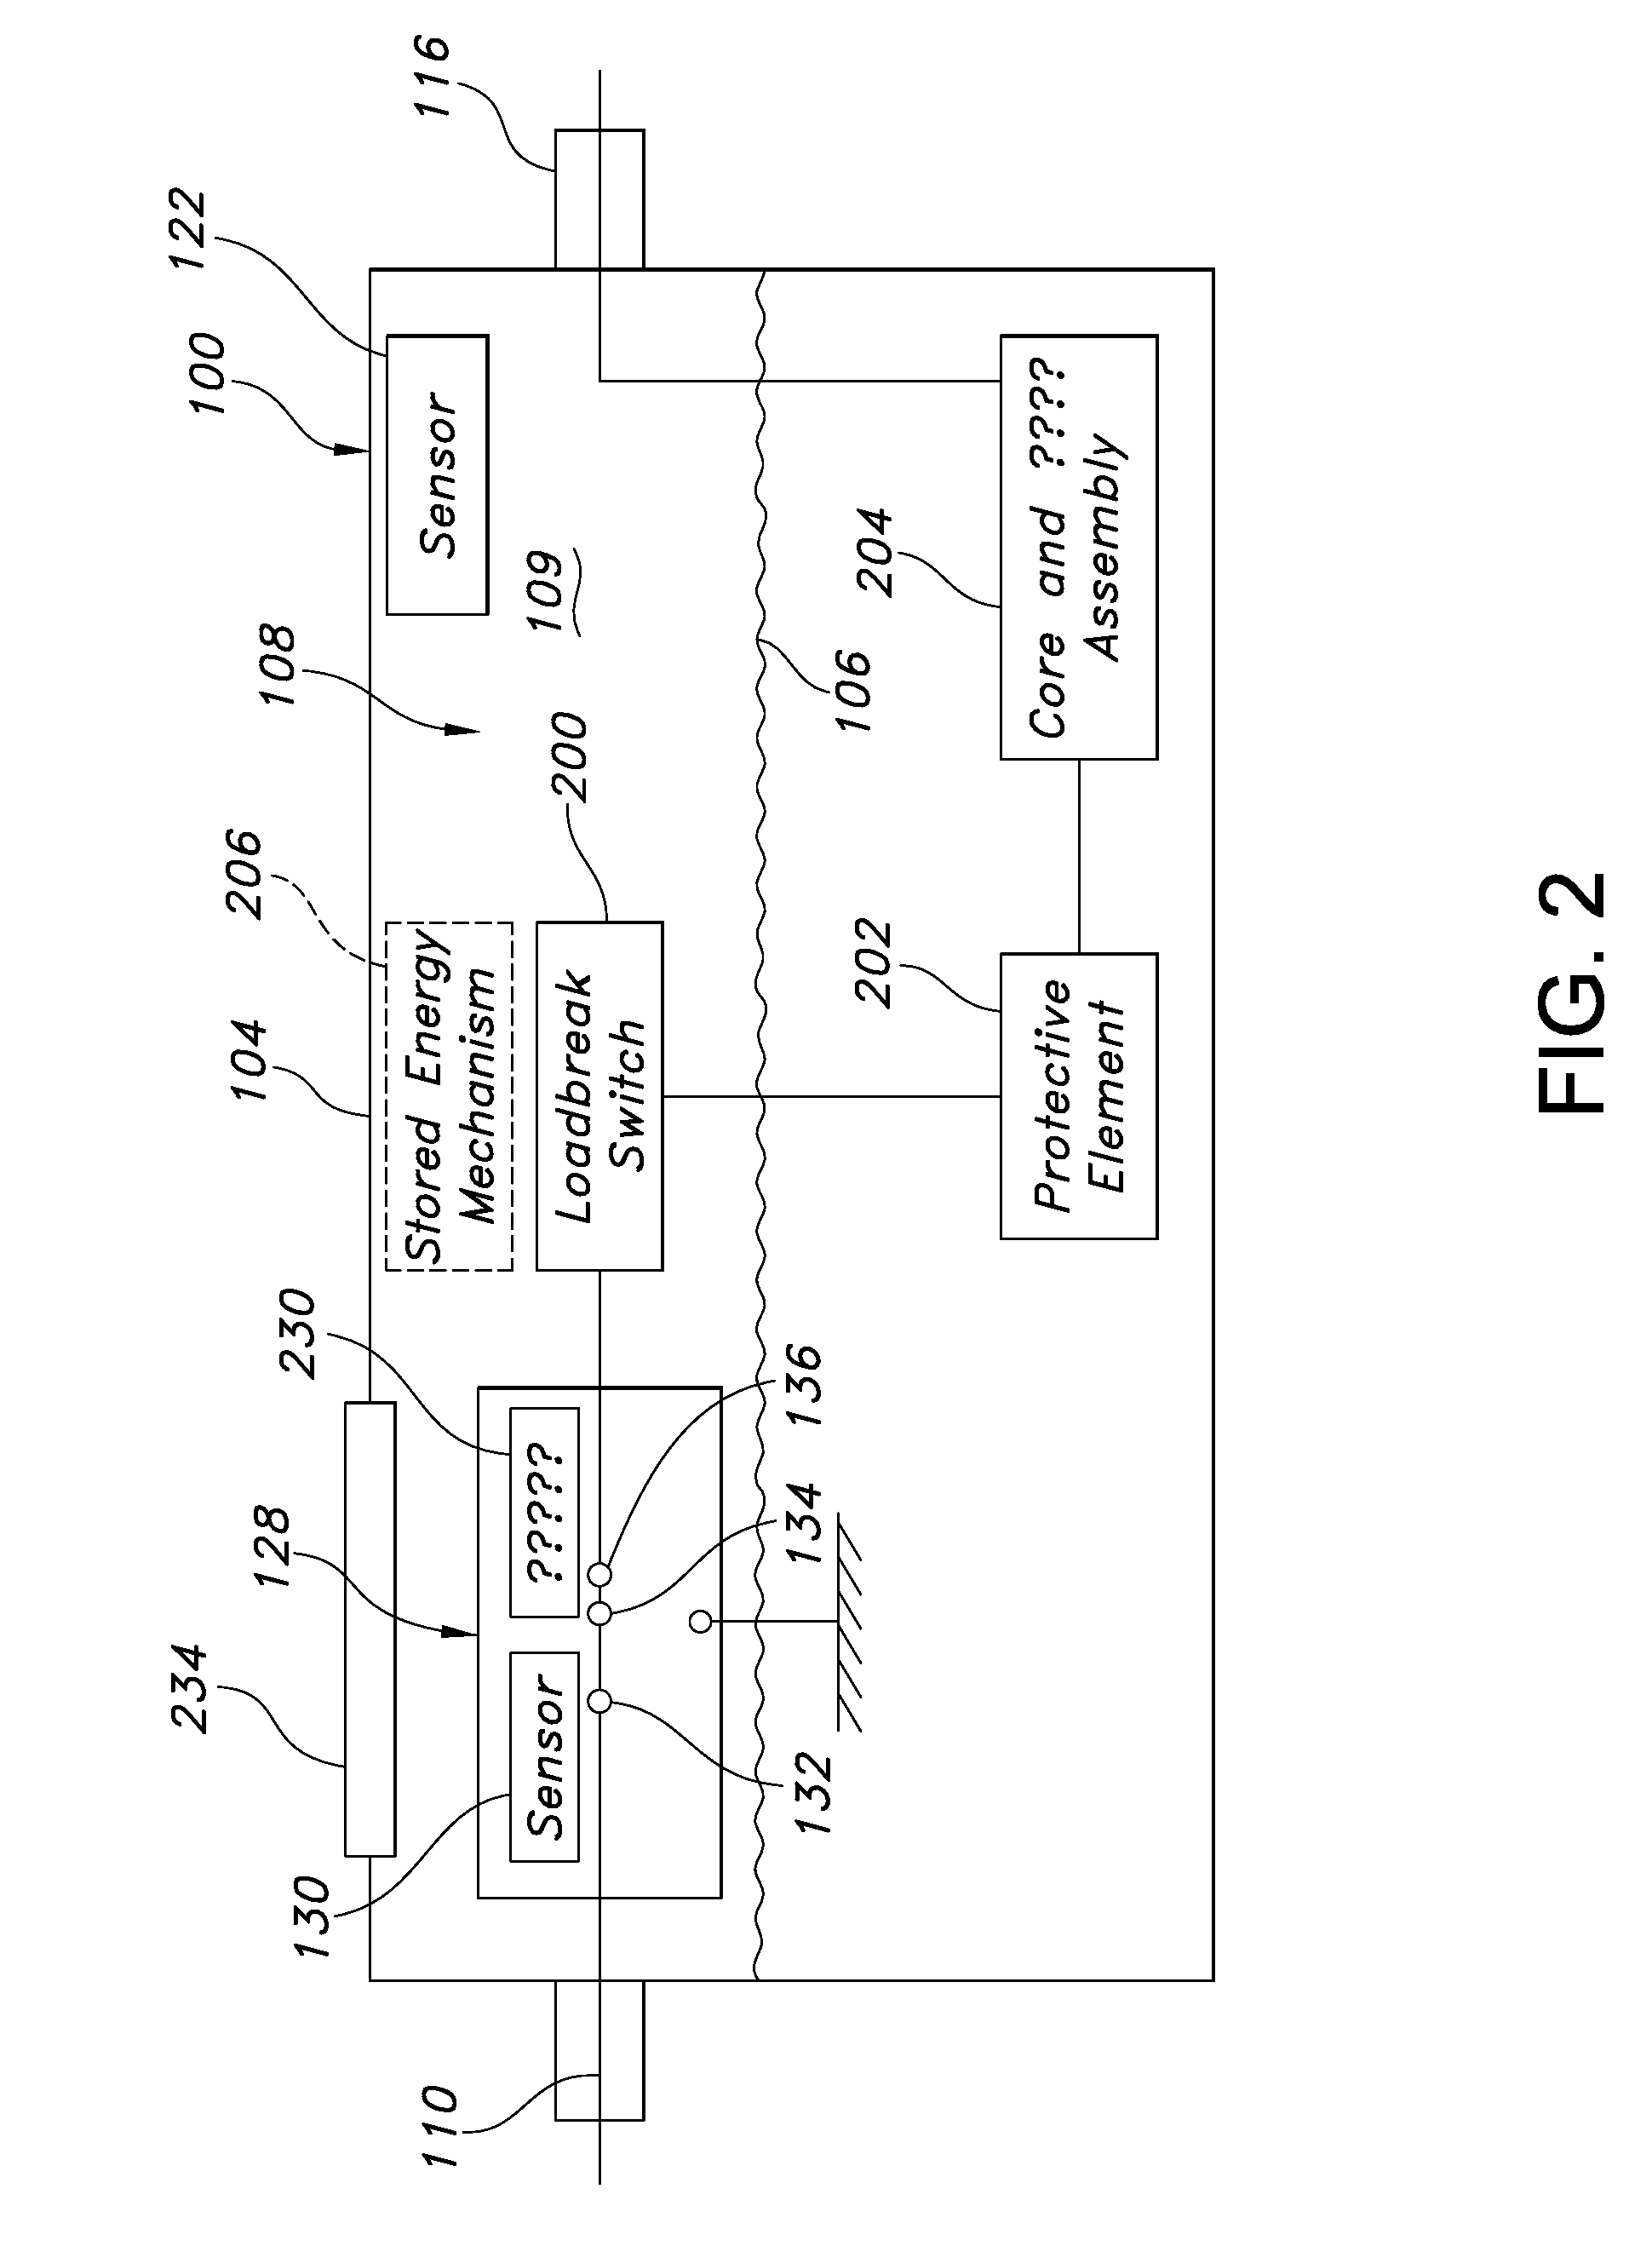 Arc suppression device, system and methods for liquid insulated electrical apparatus